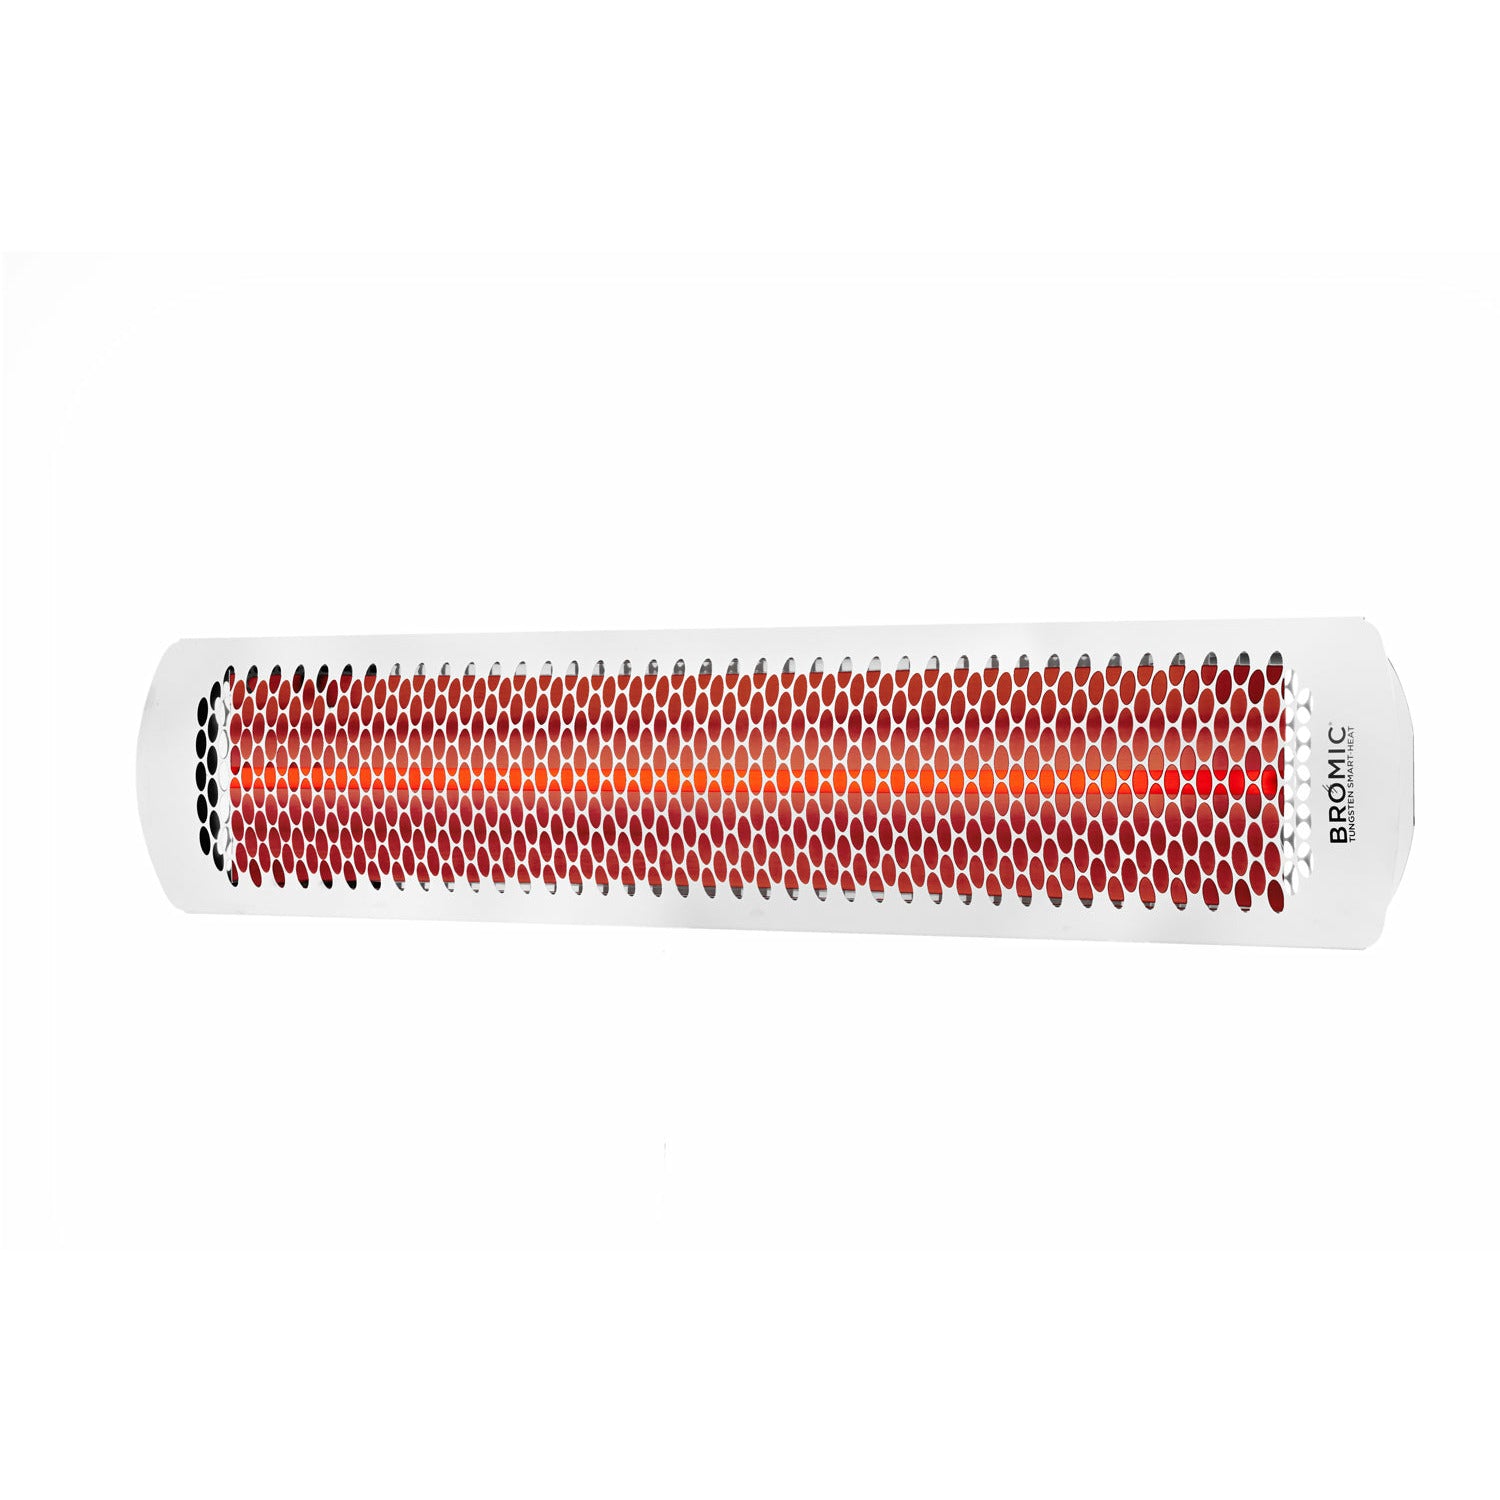 6000W Tungsten Smart-Heat Electric Patio Heater in White Stainless Steel, Black High Temperature Coating in white background